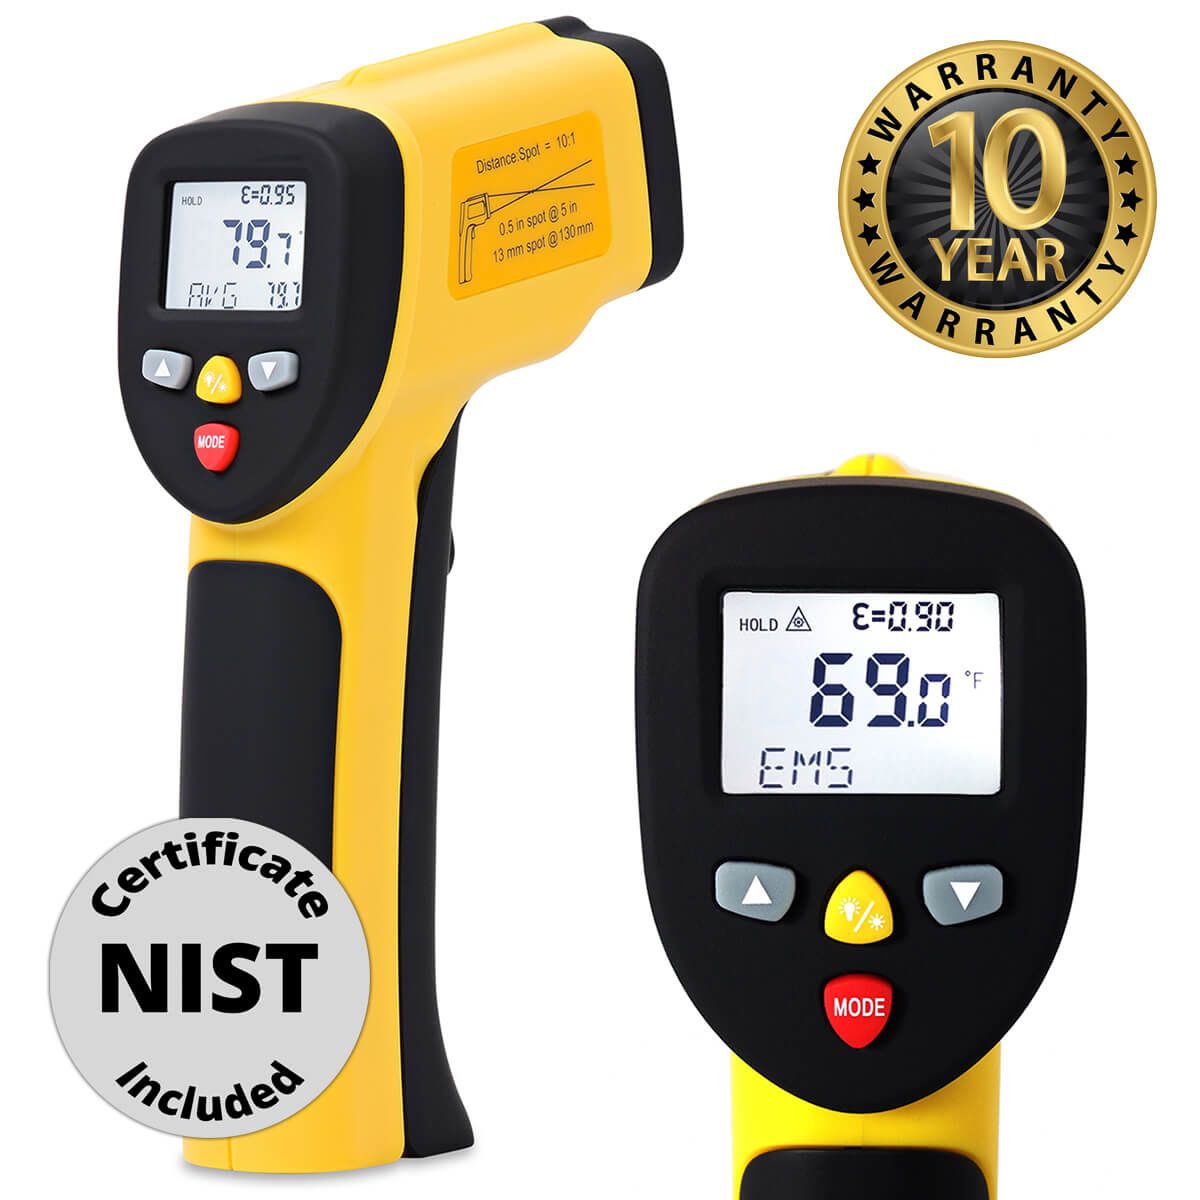 eT1050D laser temperature gun with NIST certificate and 10 year warranty